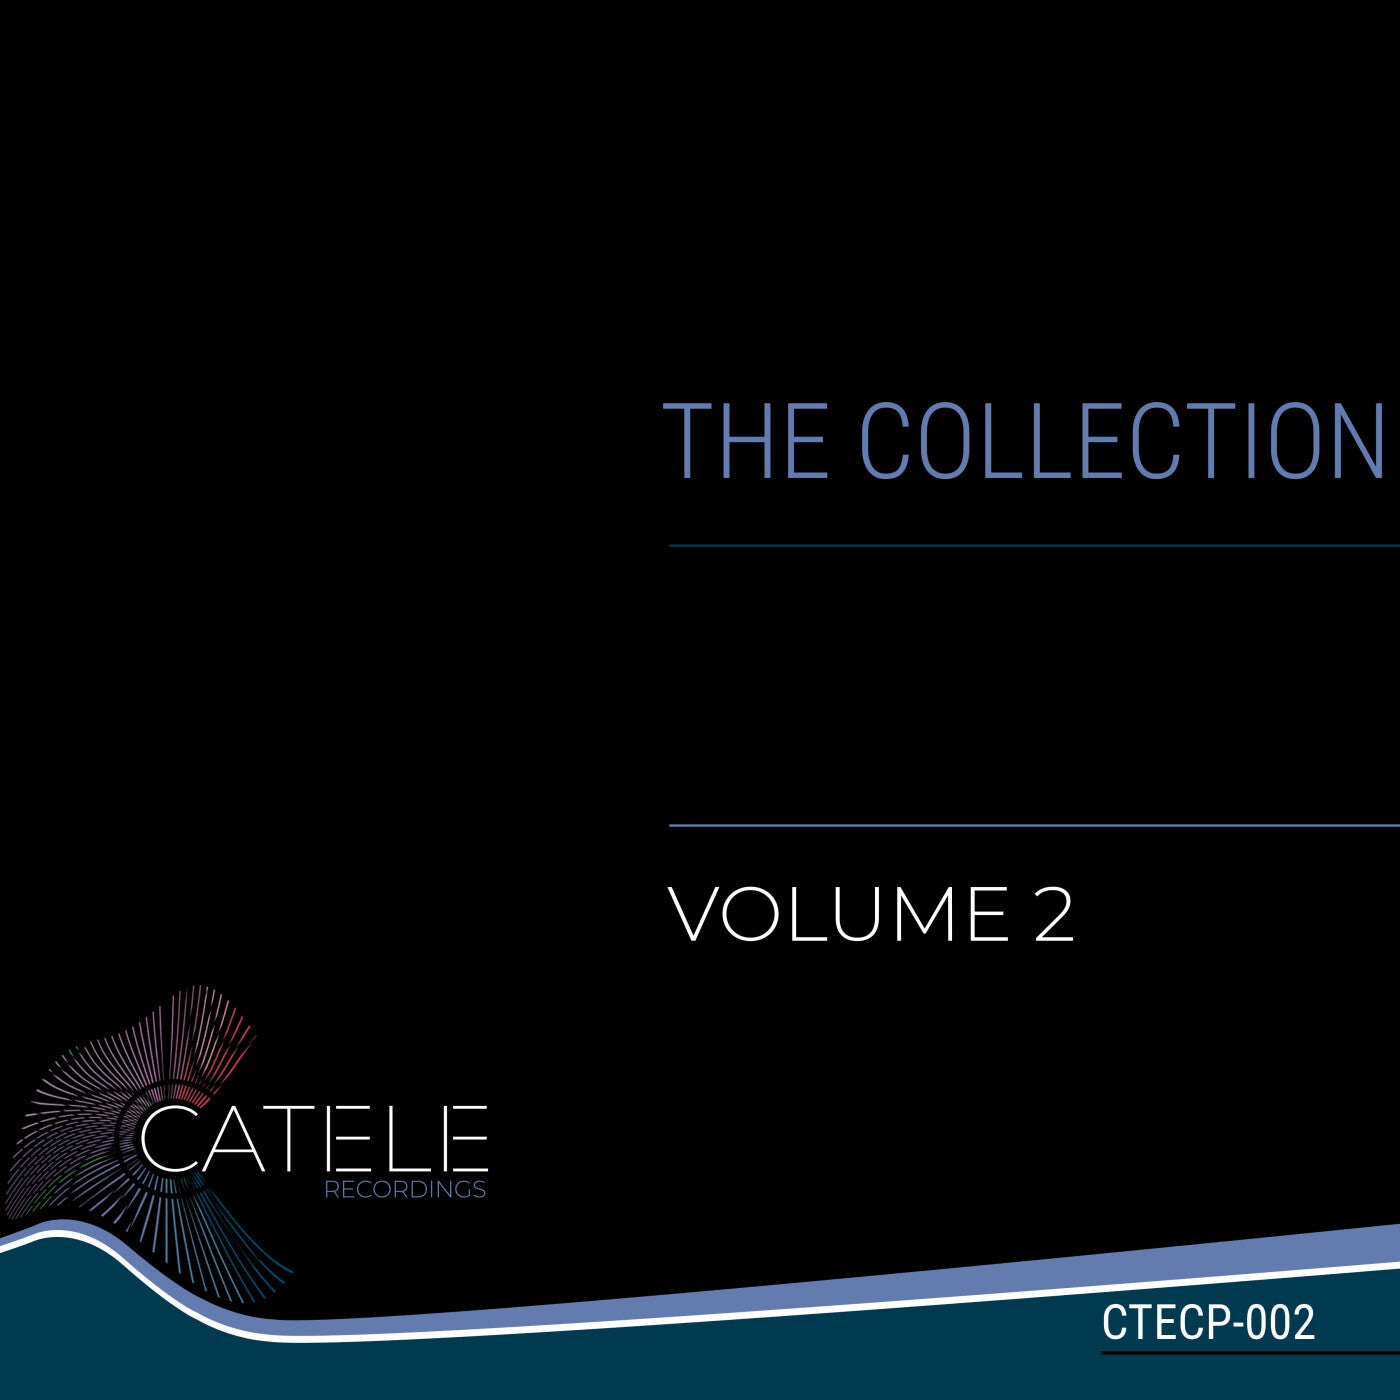 The Collection - Volume 2